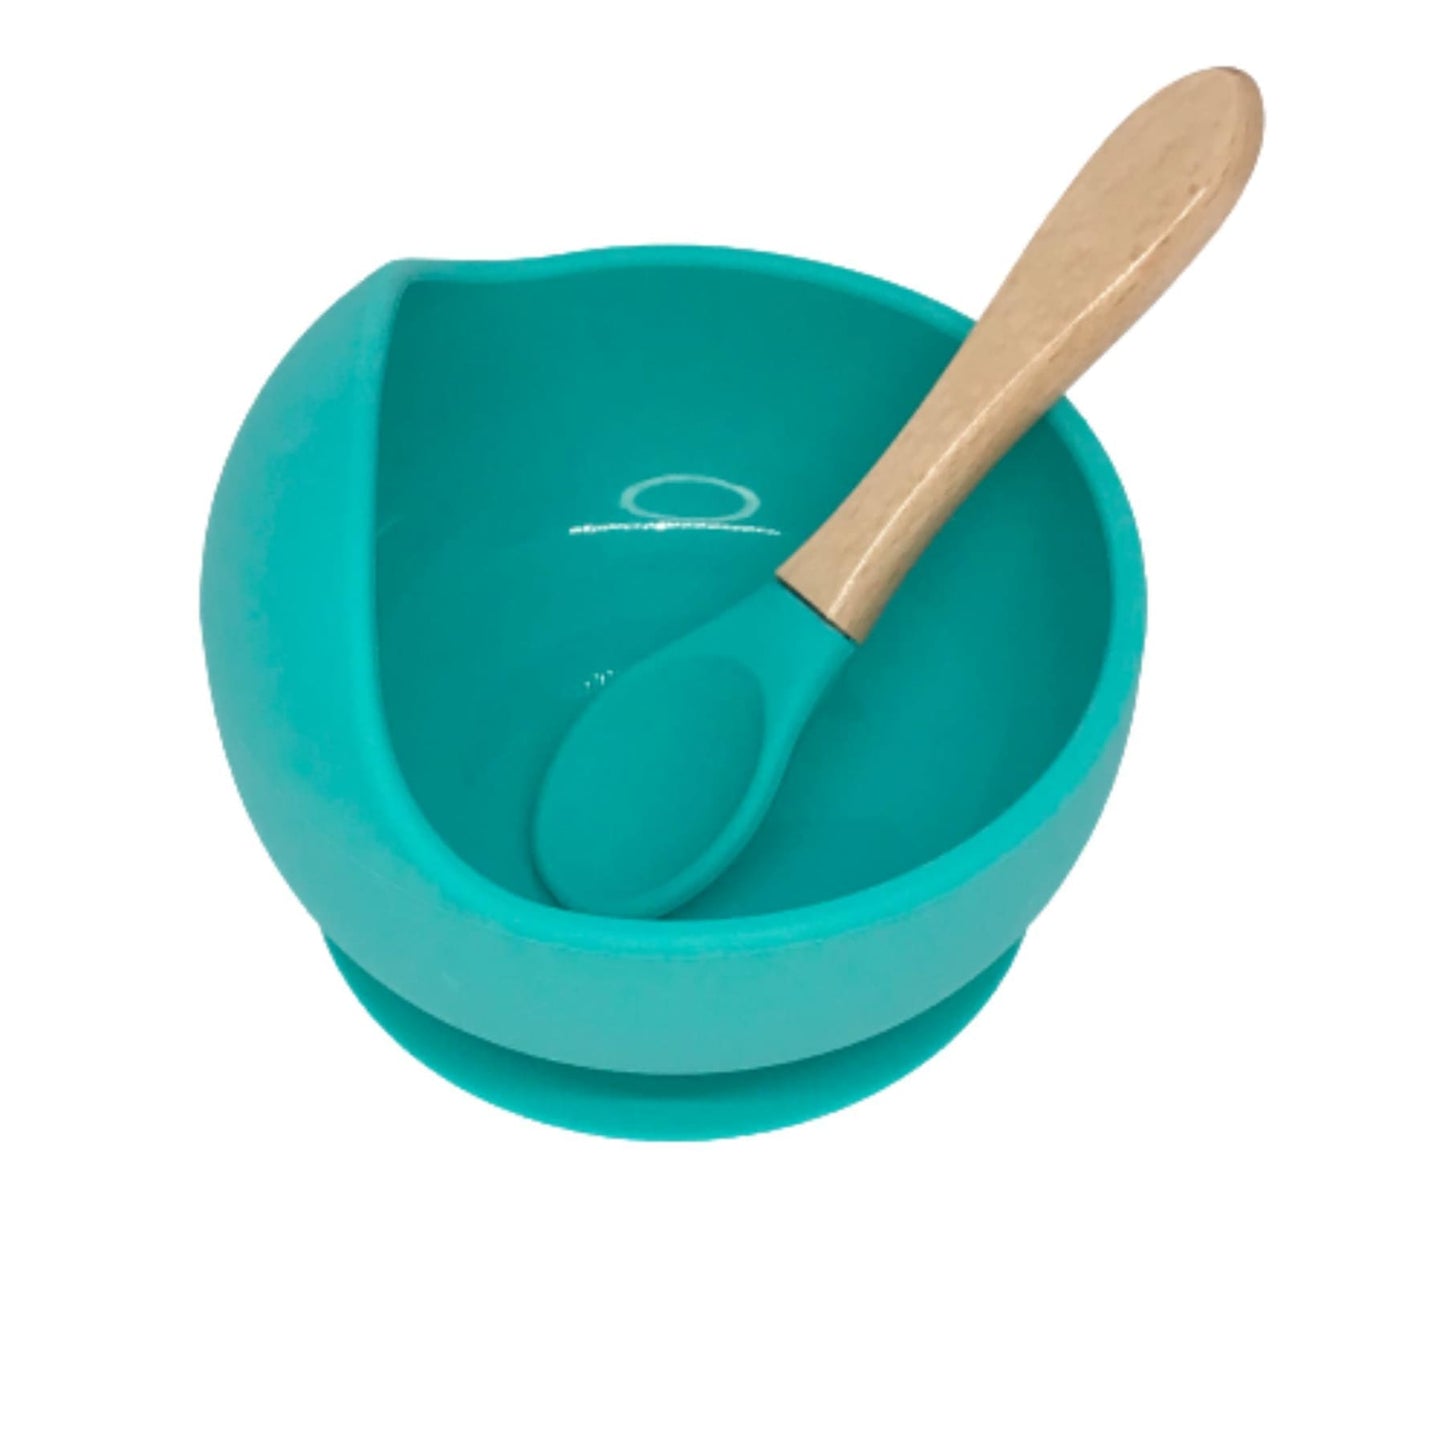 Green Silicone bowl with suction base for baby feeding time | hunny bubba kids